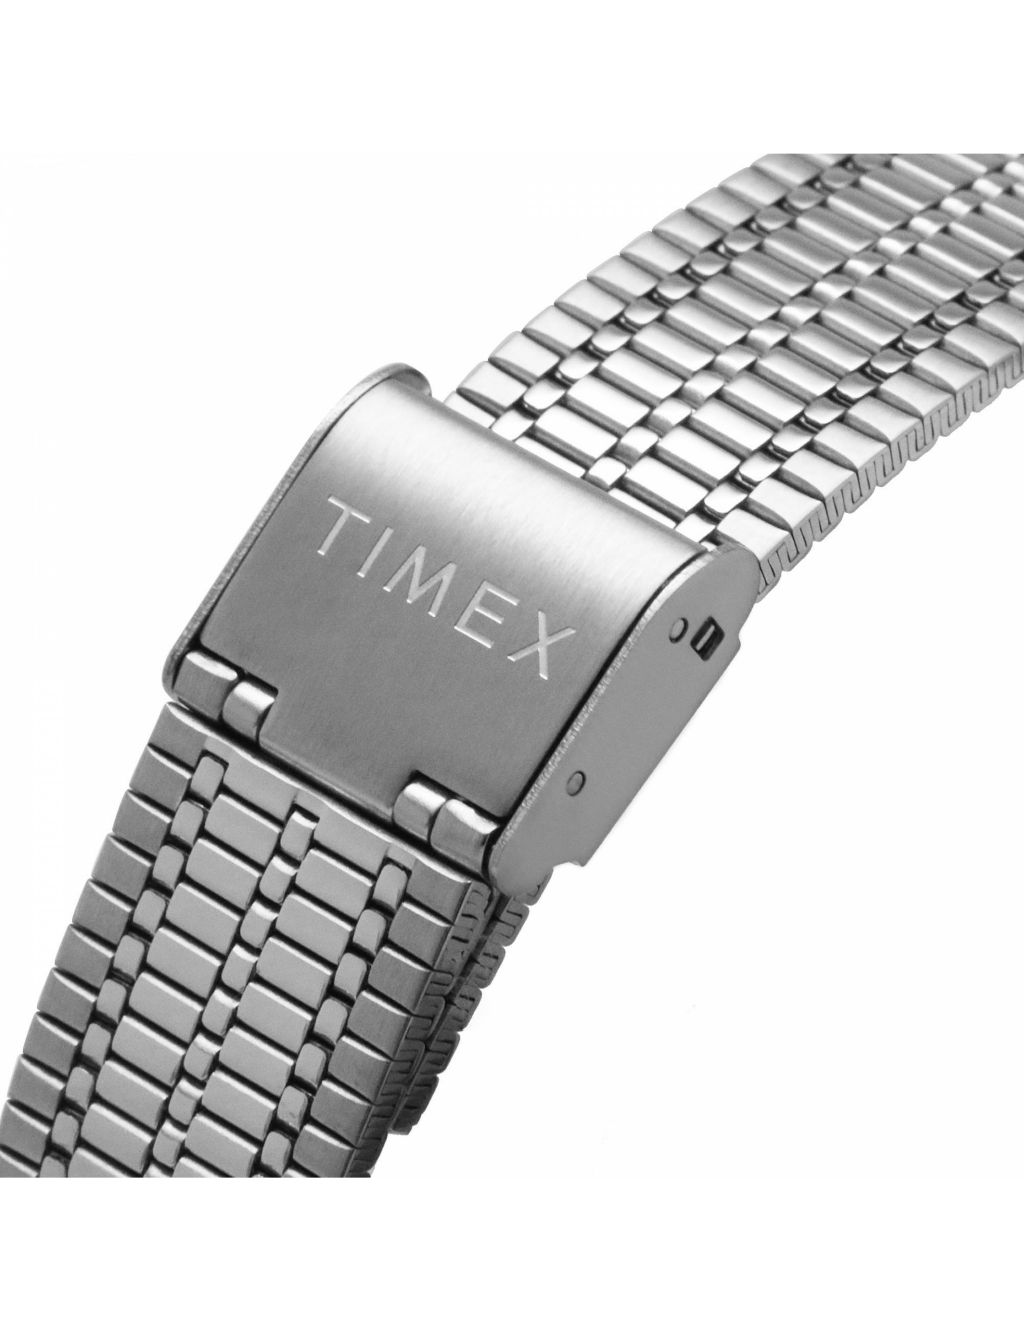 Timex Q Diver Stainless Steel Watch image 8